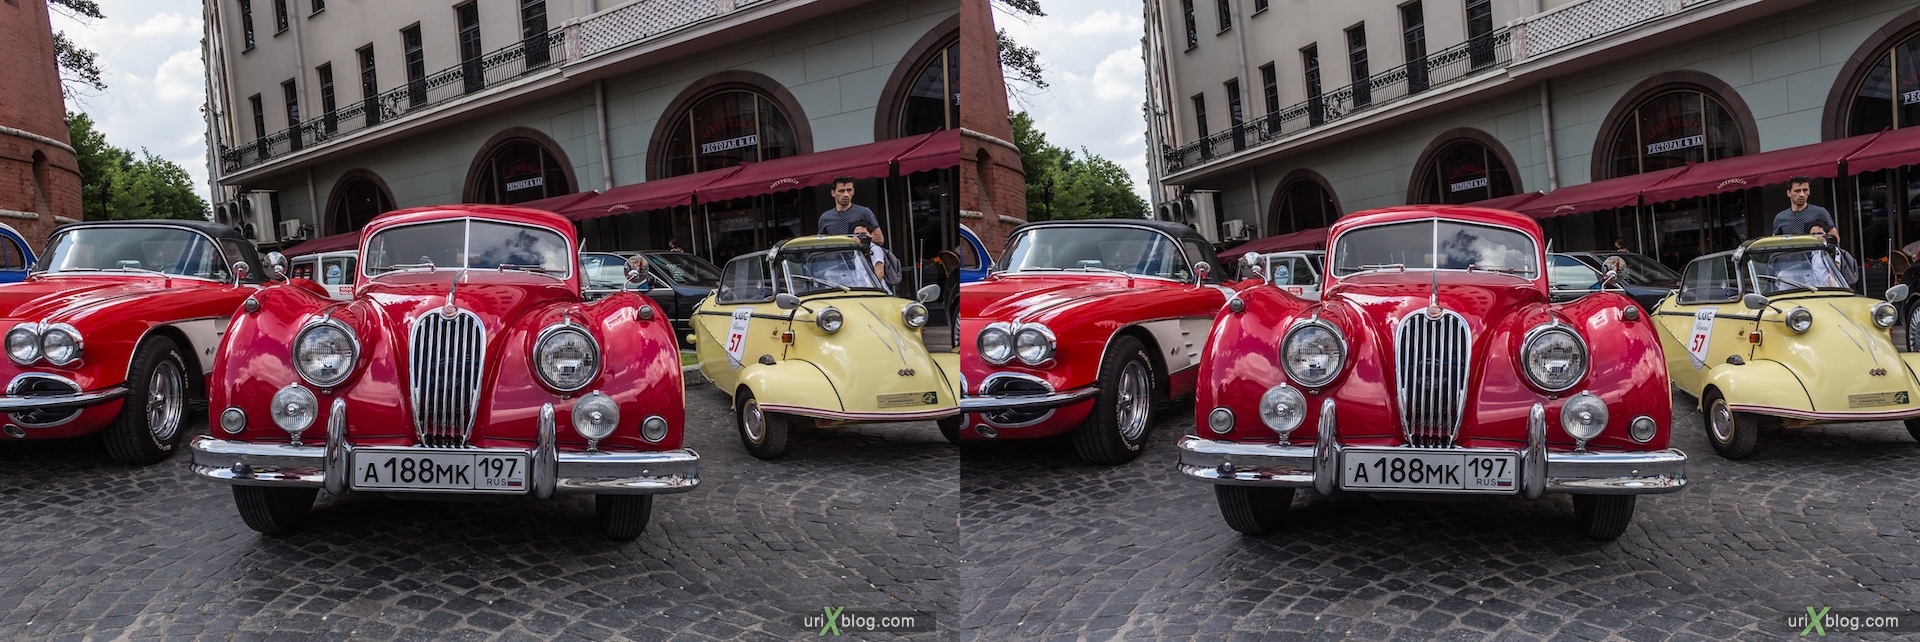 2013, old, automobile, rally, Moscow, Russia, 3D, stereo pair, cross-eyed, crossview, cross view stereo pair, stereoscopic